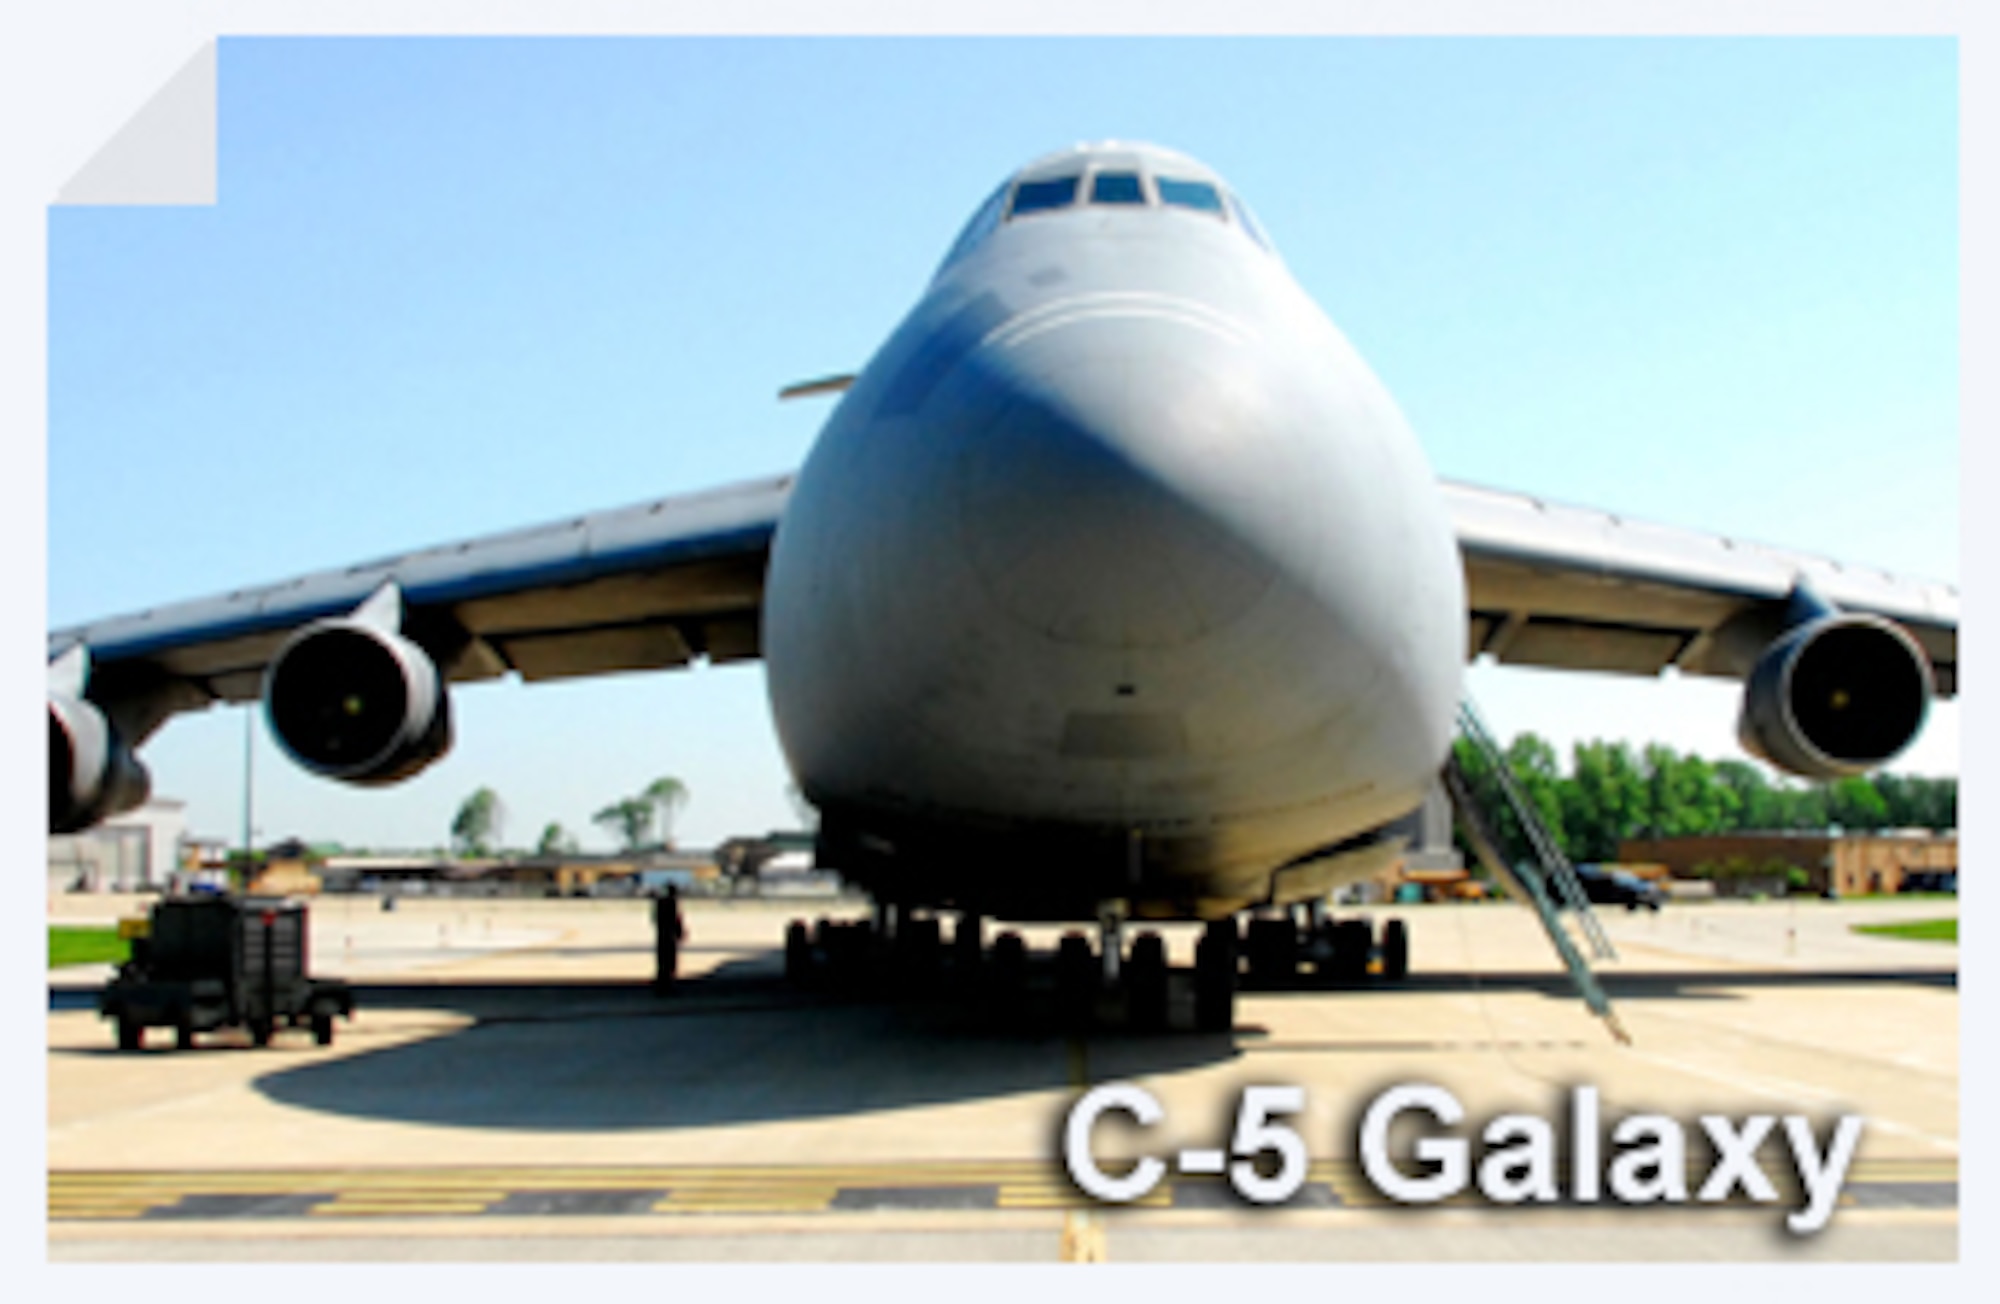 The C-5 Galaxy is one of the largest aircraft in the world. This workhorse is part of a modernization program to extend the life of the aircraft into the 21st century. (U.S. Air Force illustration)